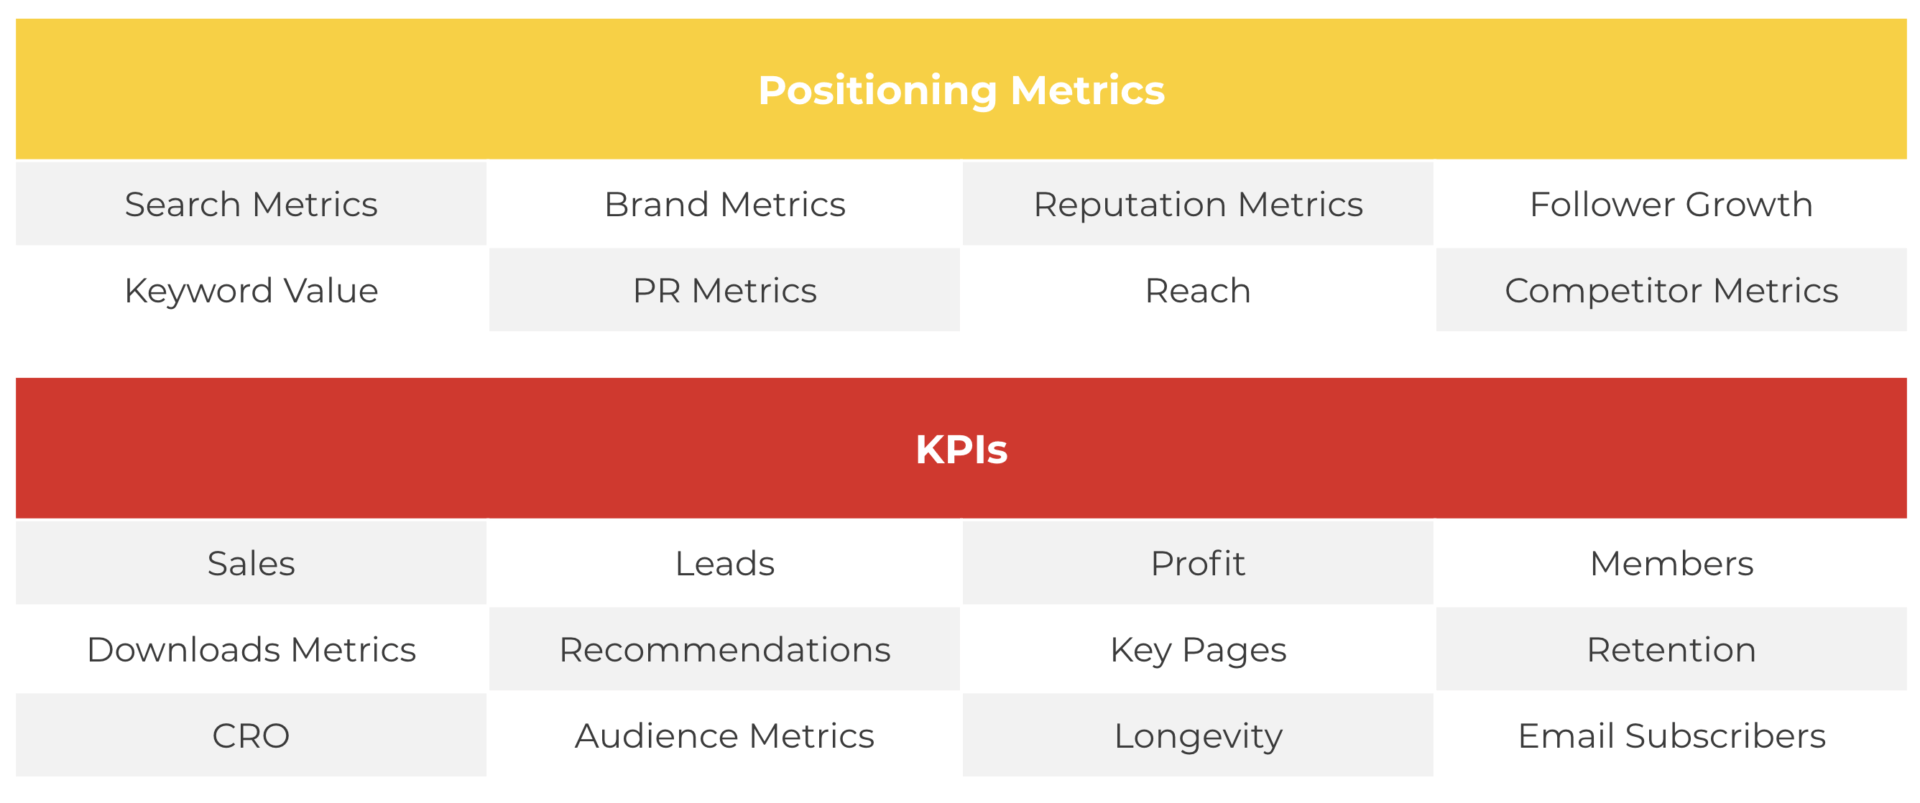 different positioning metric examples and KPIs that customers should be aware of